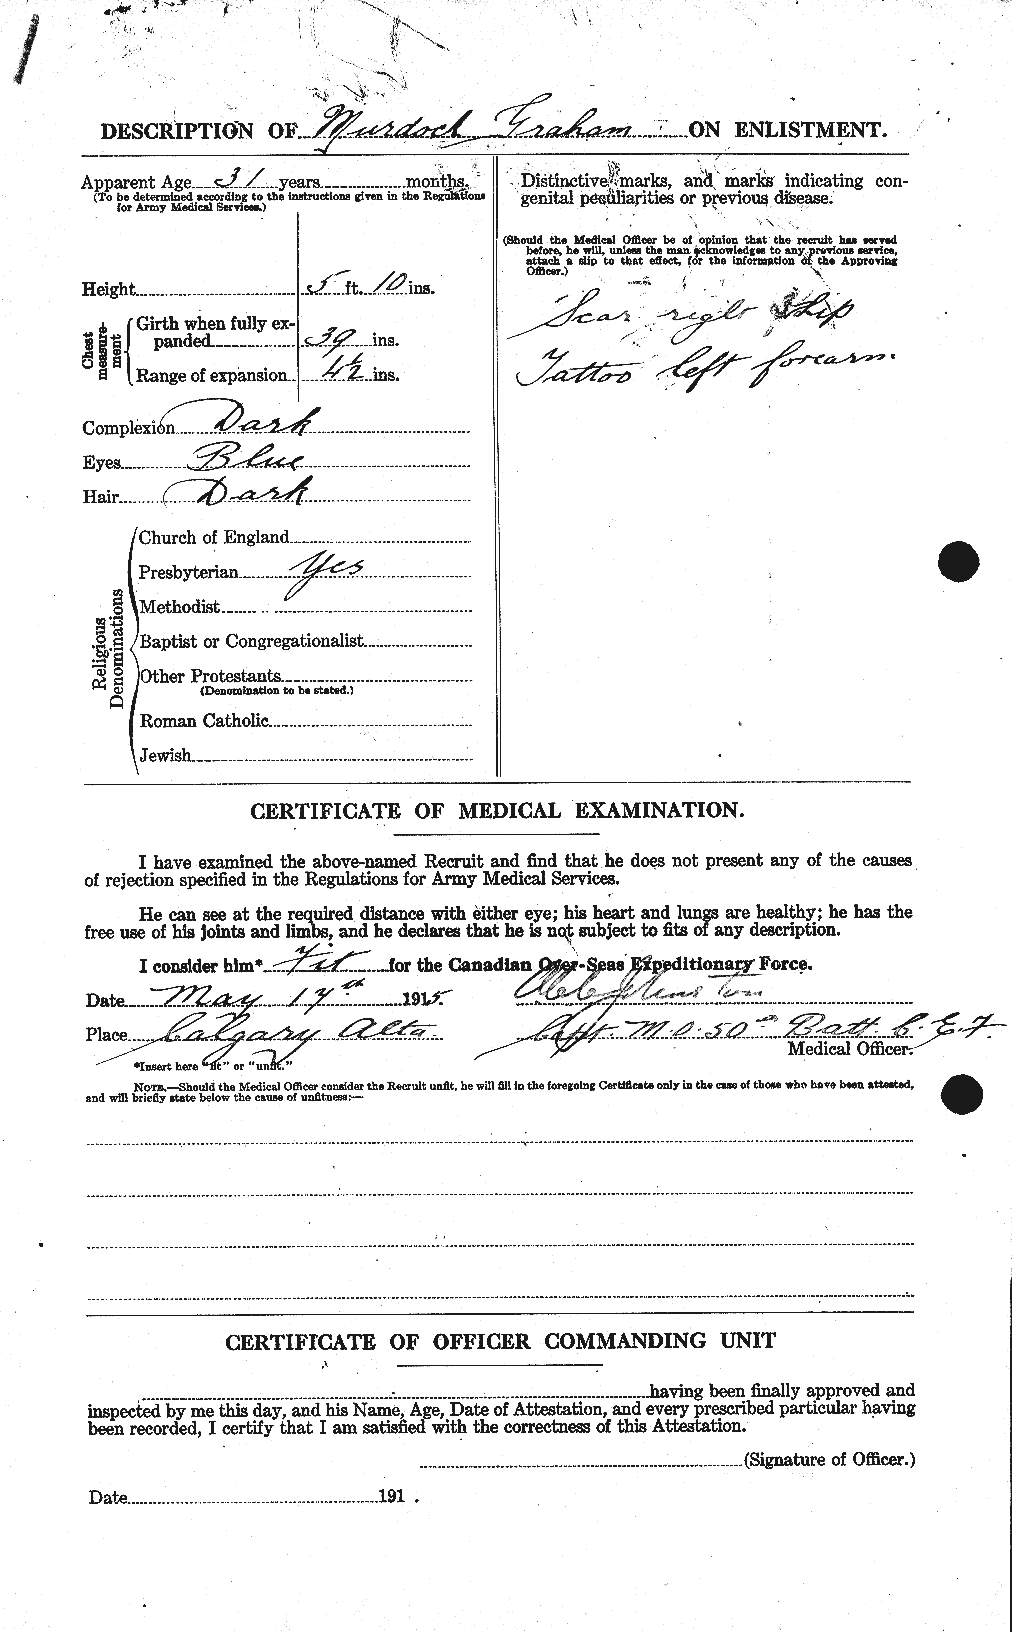 Personnel Records of the First World War - CEF 359315b